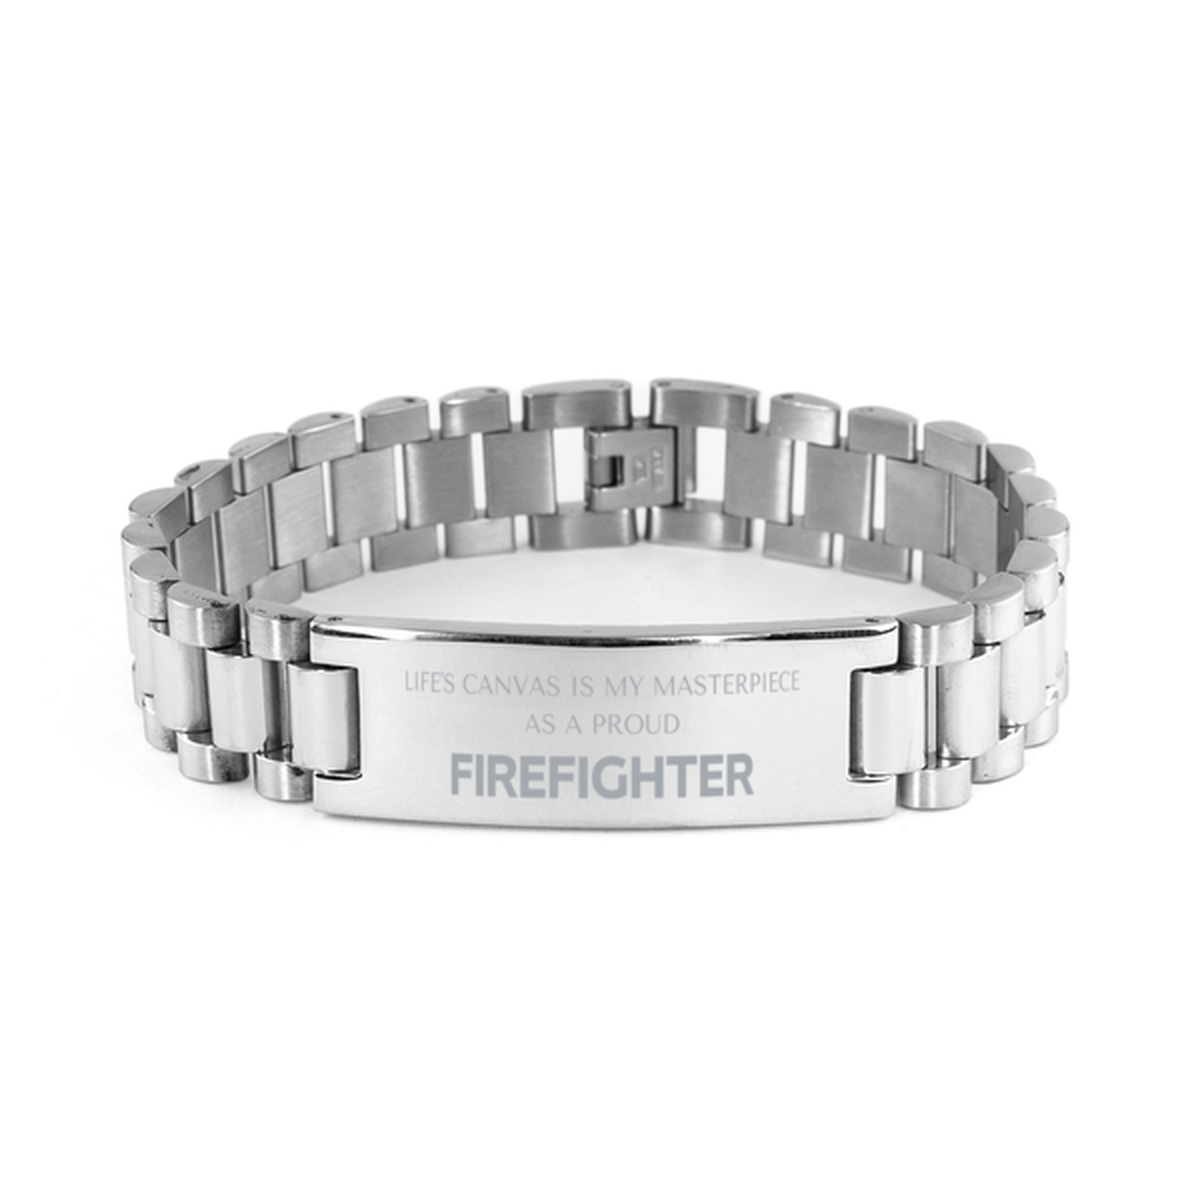 Proud Firefighter Gifts, Life's canvas is my masterpiece, Epic Birthday Christmas Unique Ladder Stainless Steel Bracelet For Firefighter, Coworkers, Men, Women, Friends